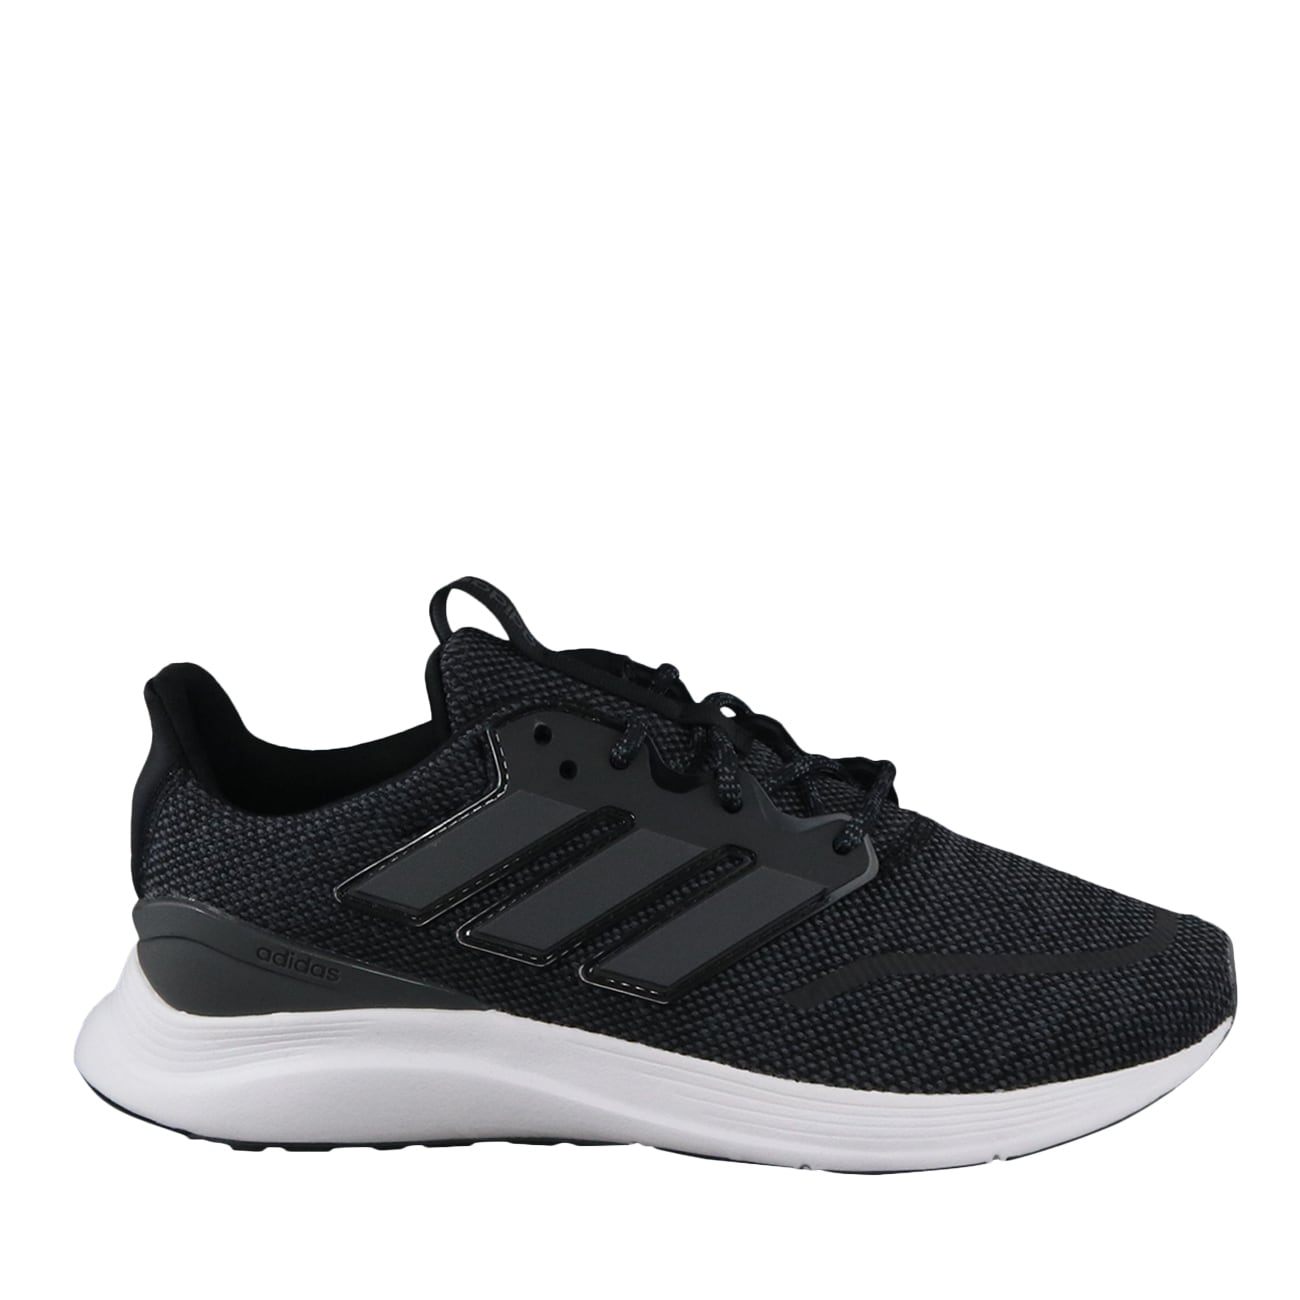 adidas energy falcon mens running shoes review